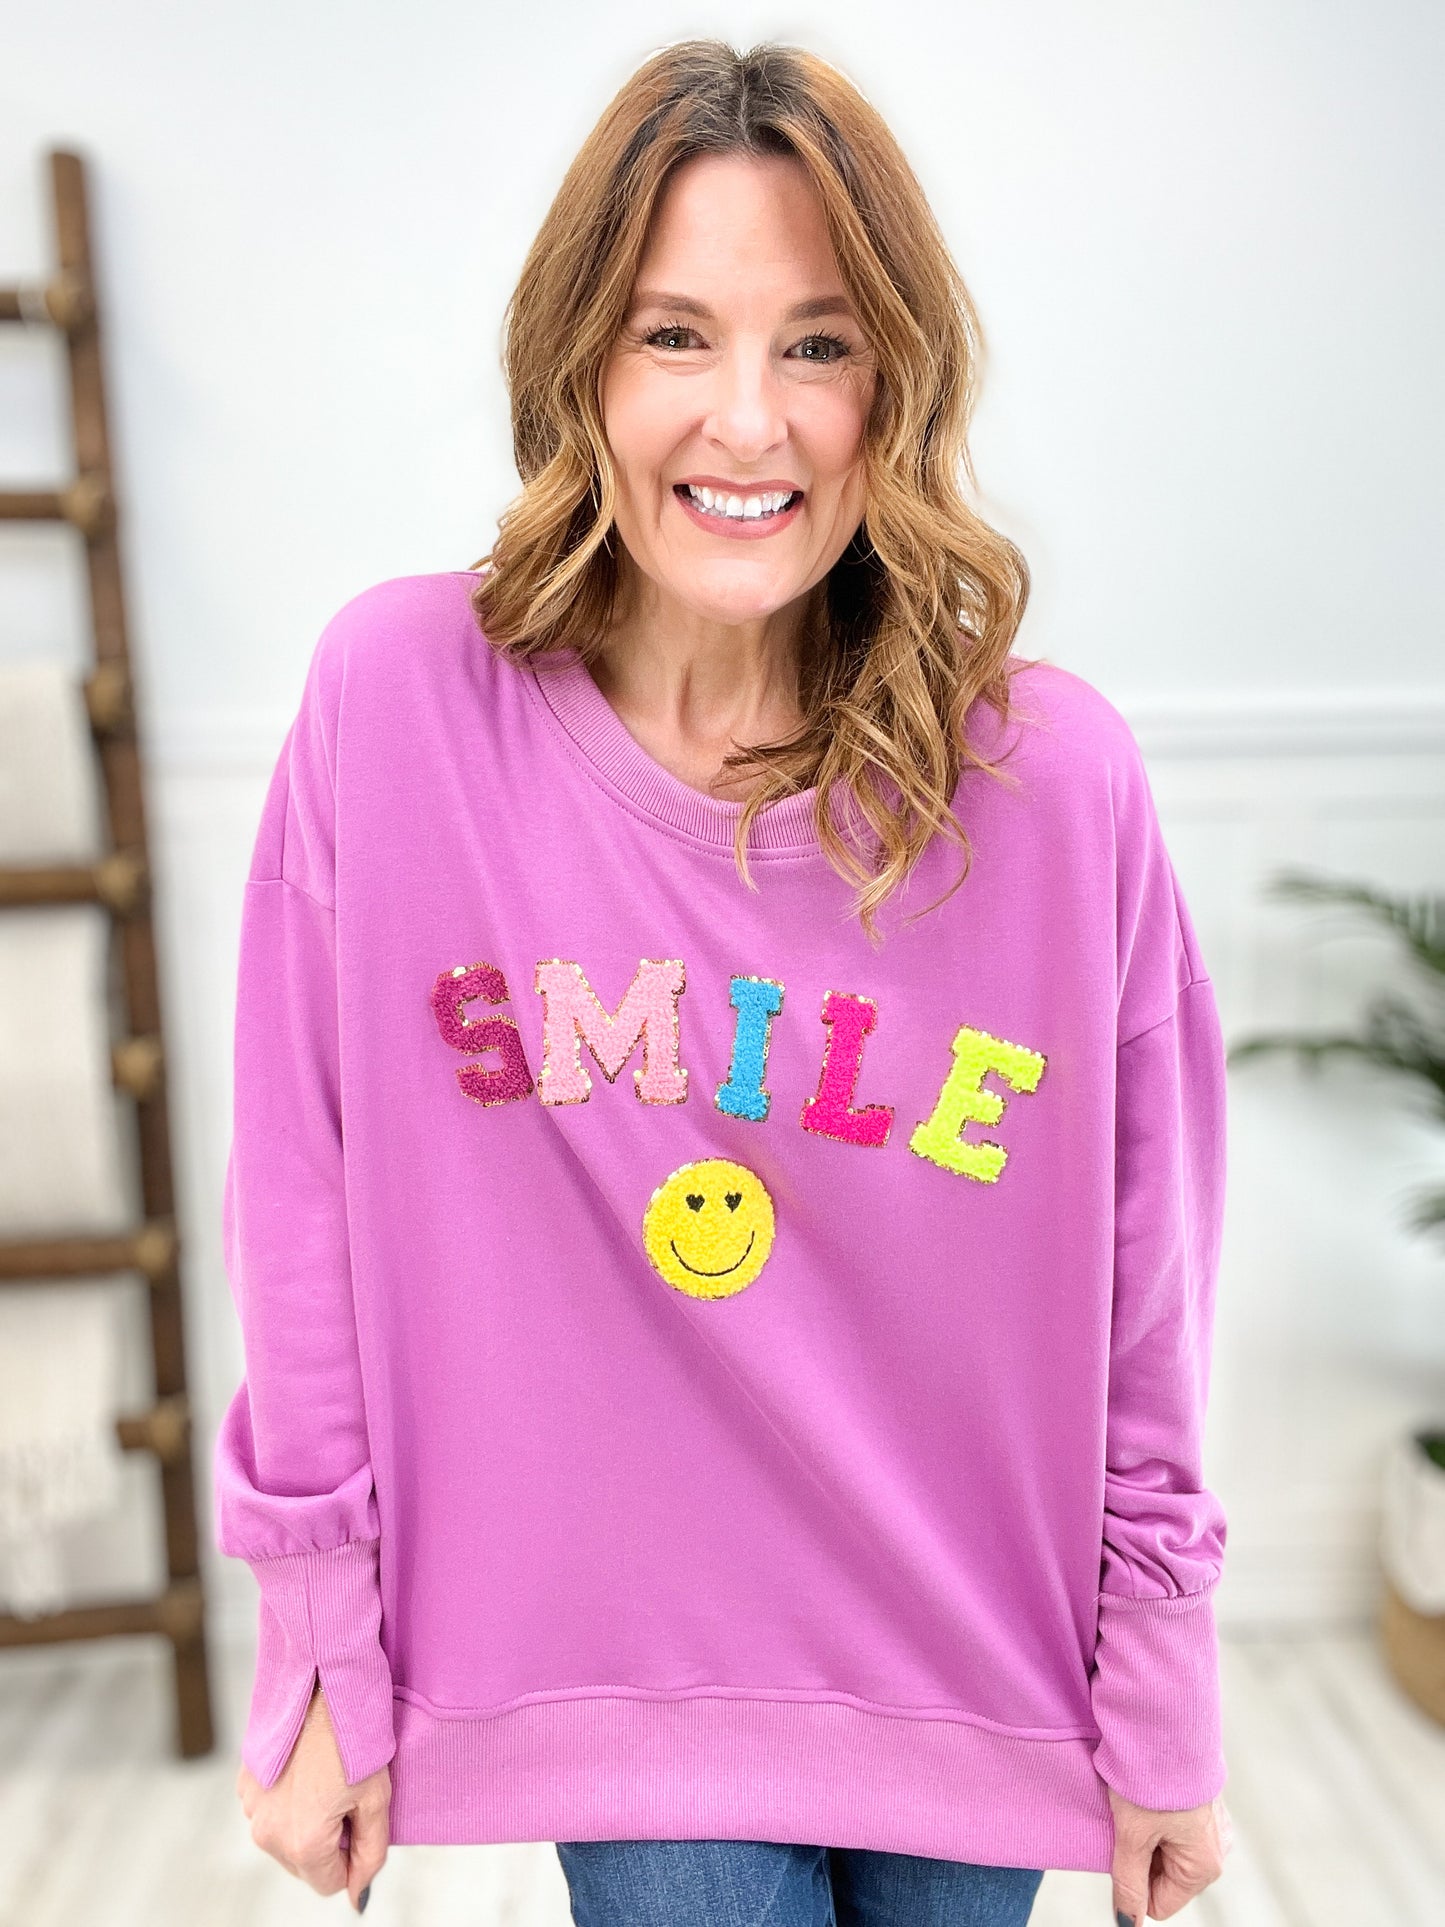 Flash a Smile French Terry Top